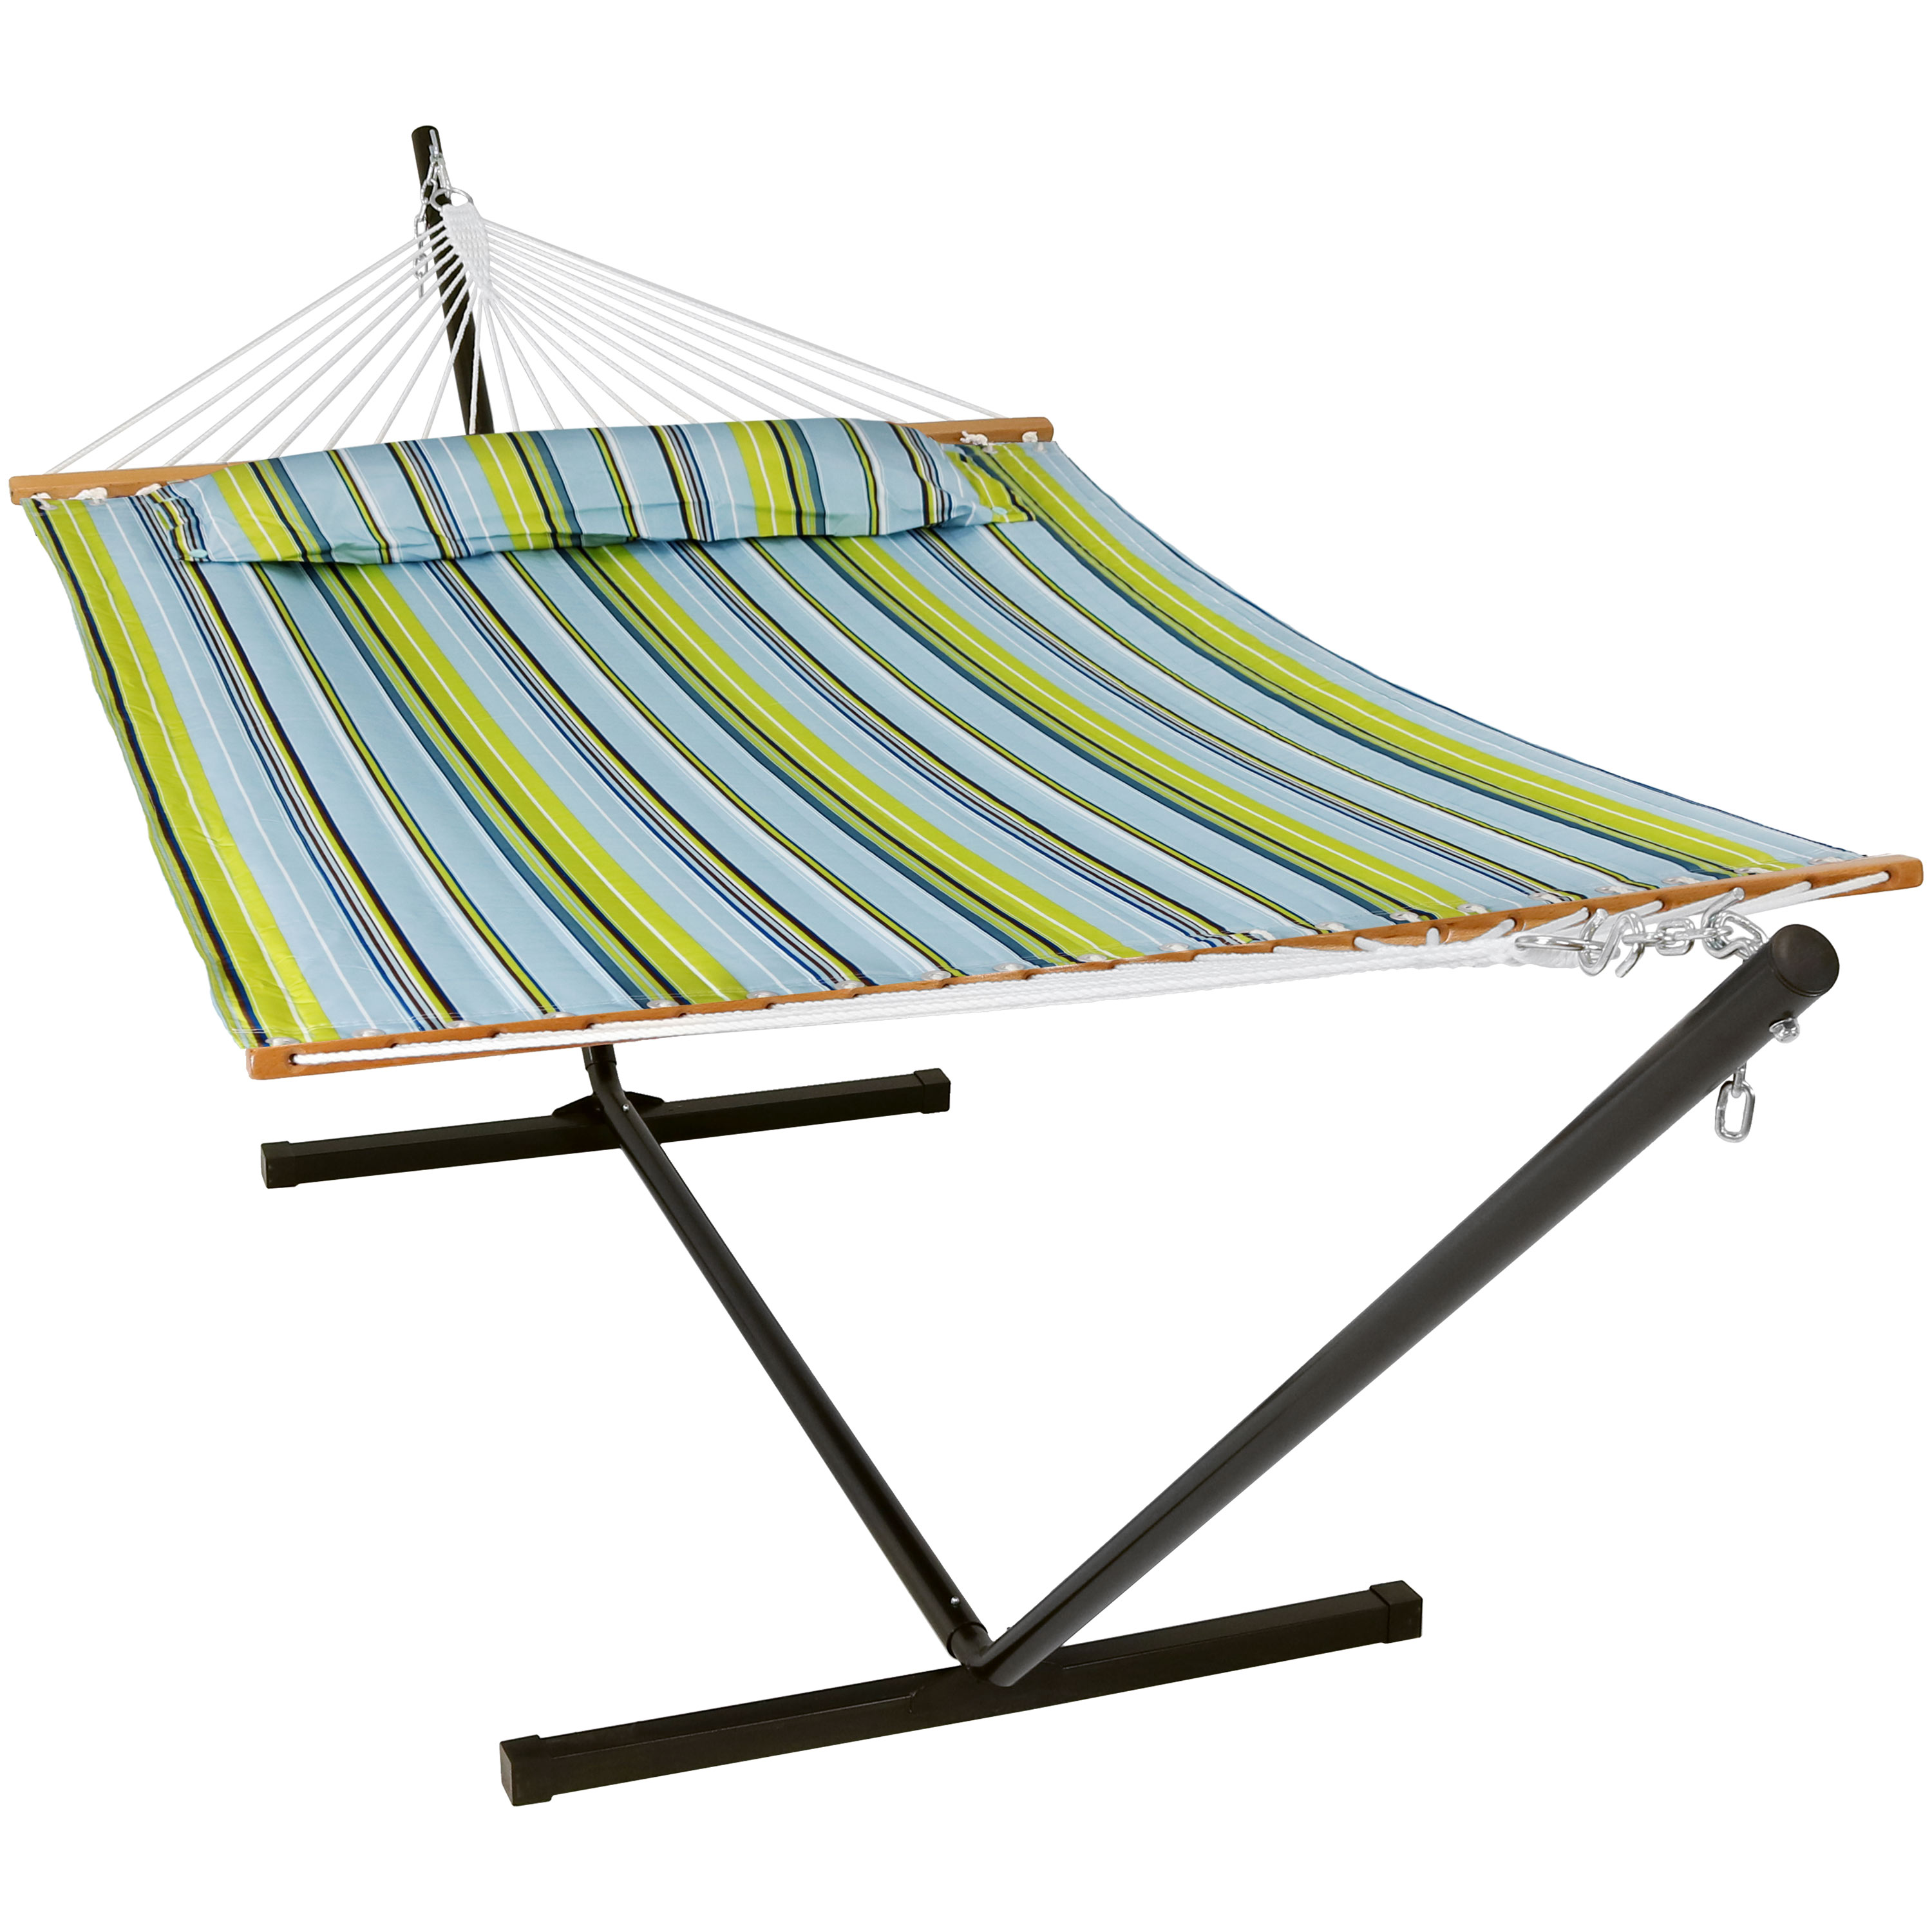 Sunnydaze 2 Person Freestanding Quilted Fabric Spreader Bar Hammock, Choose 12 or 15 Foot Stand, Blue and Green, 12-Foot Stand